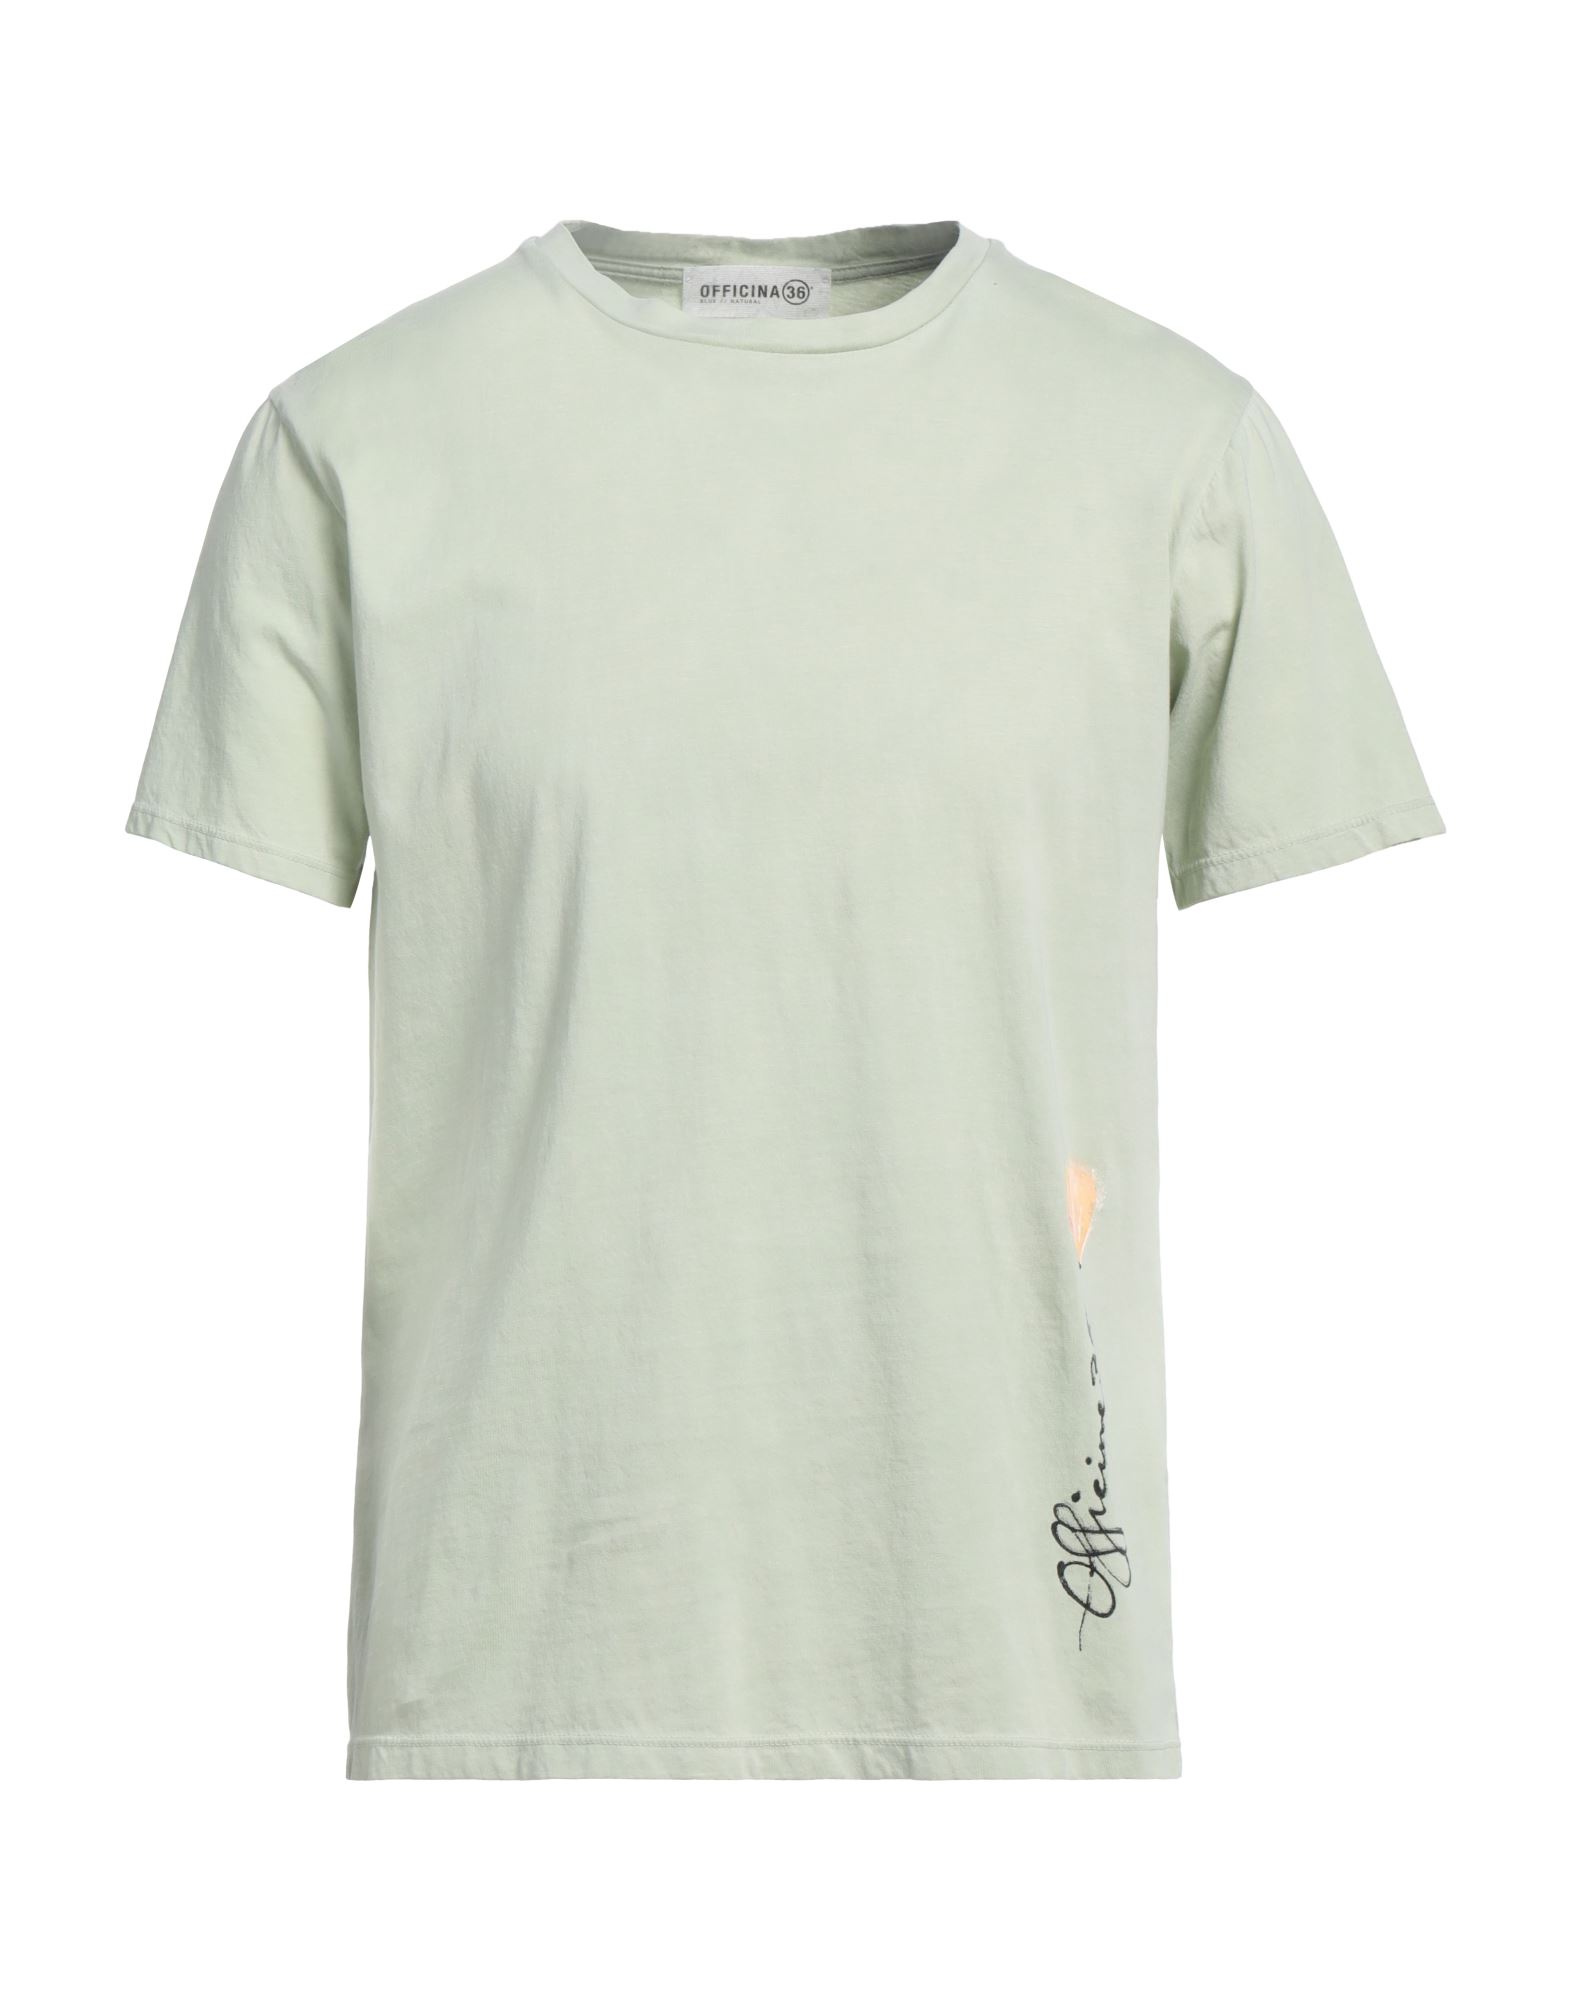 Officina 36 T-shirts In Sage Green